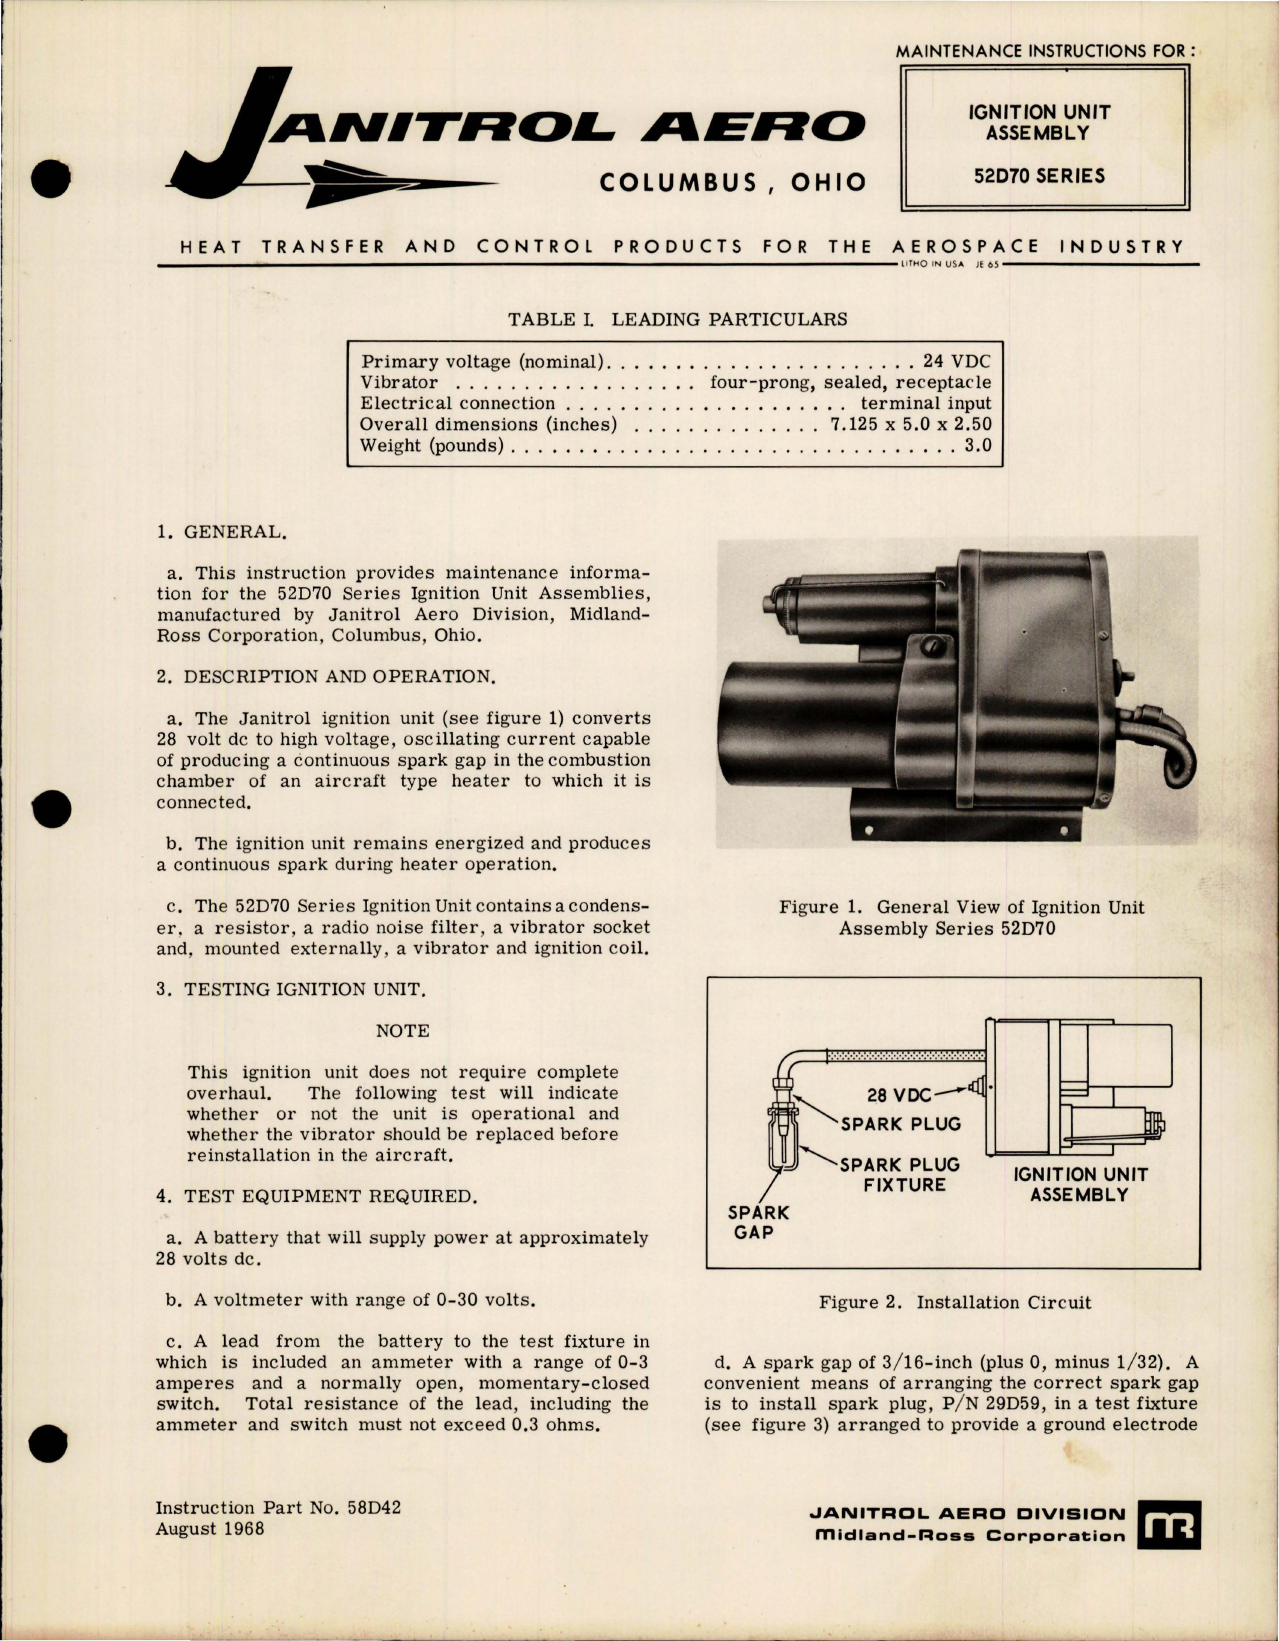 Sample page 1 from AirCorps Library document: Maintenance Instructions for Ignition Unit Assembly - Series 54D70 